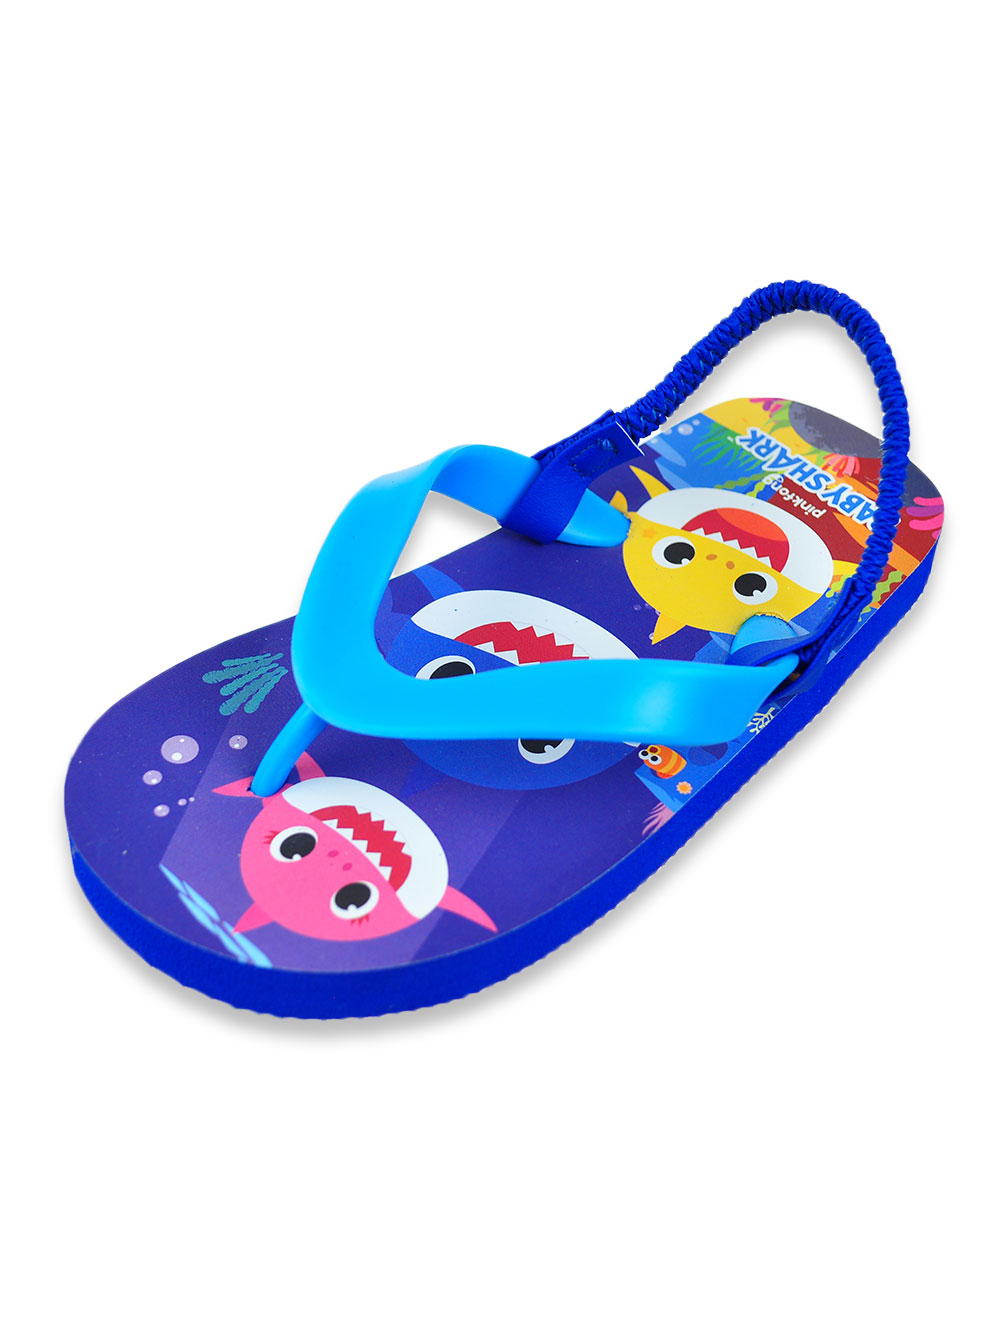 Boys Blue and Multicolor Sandals